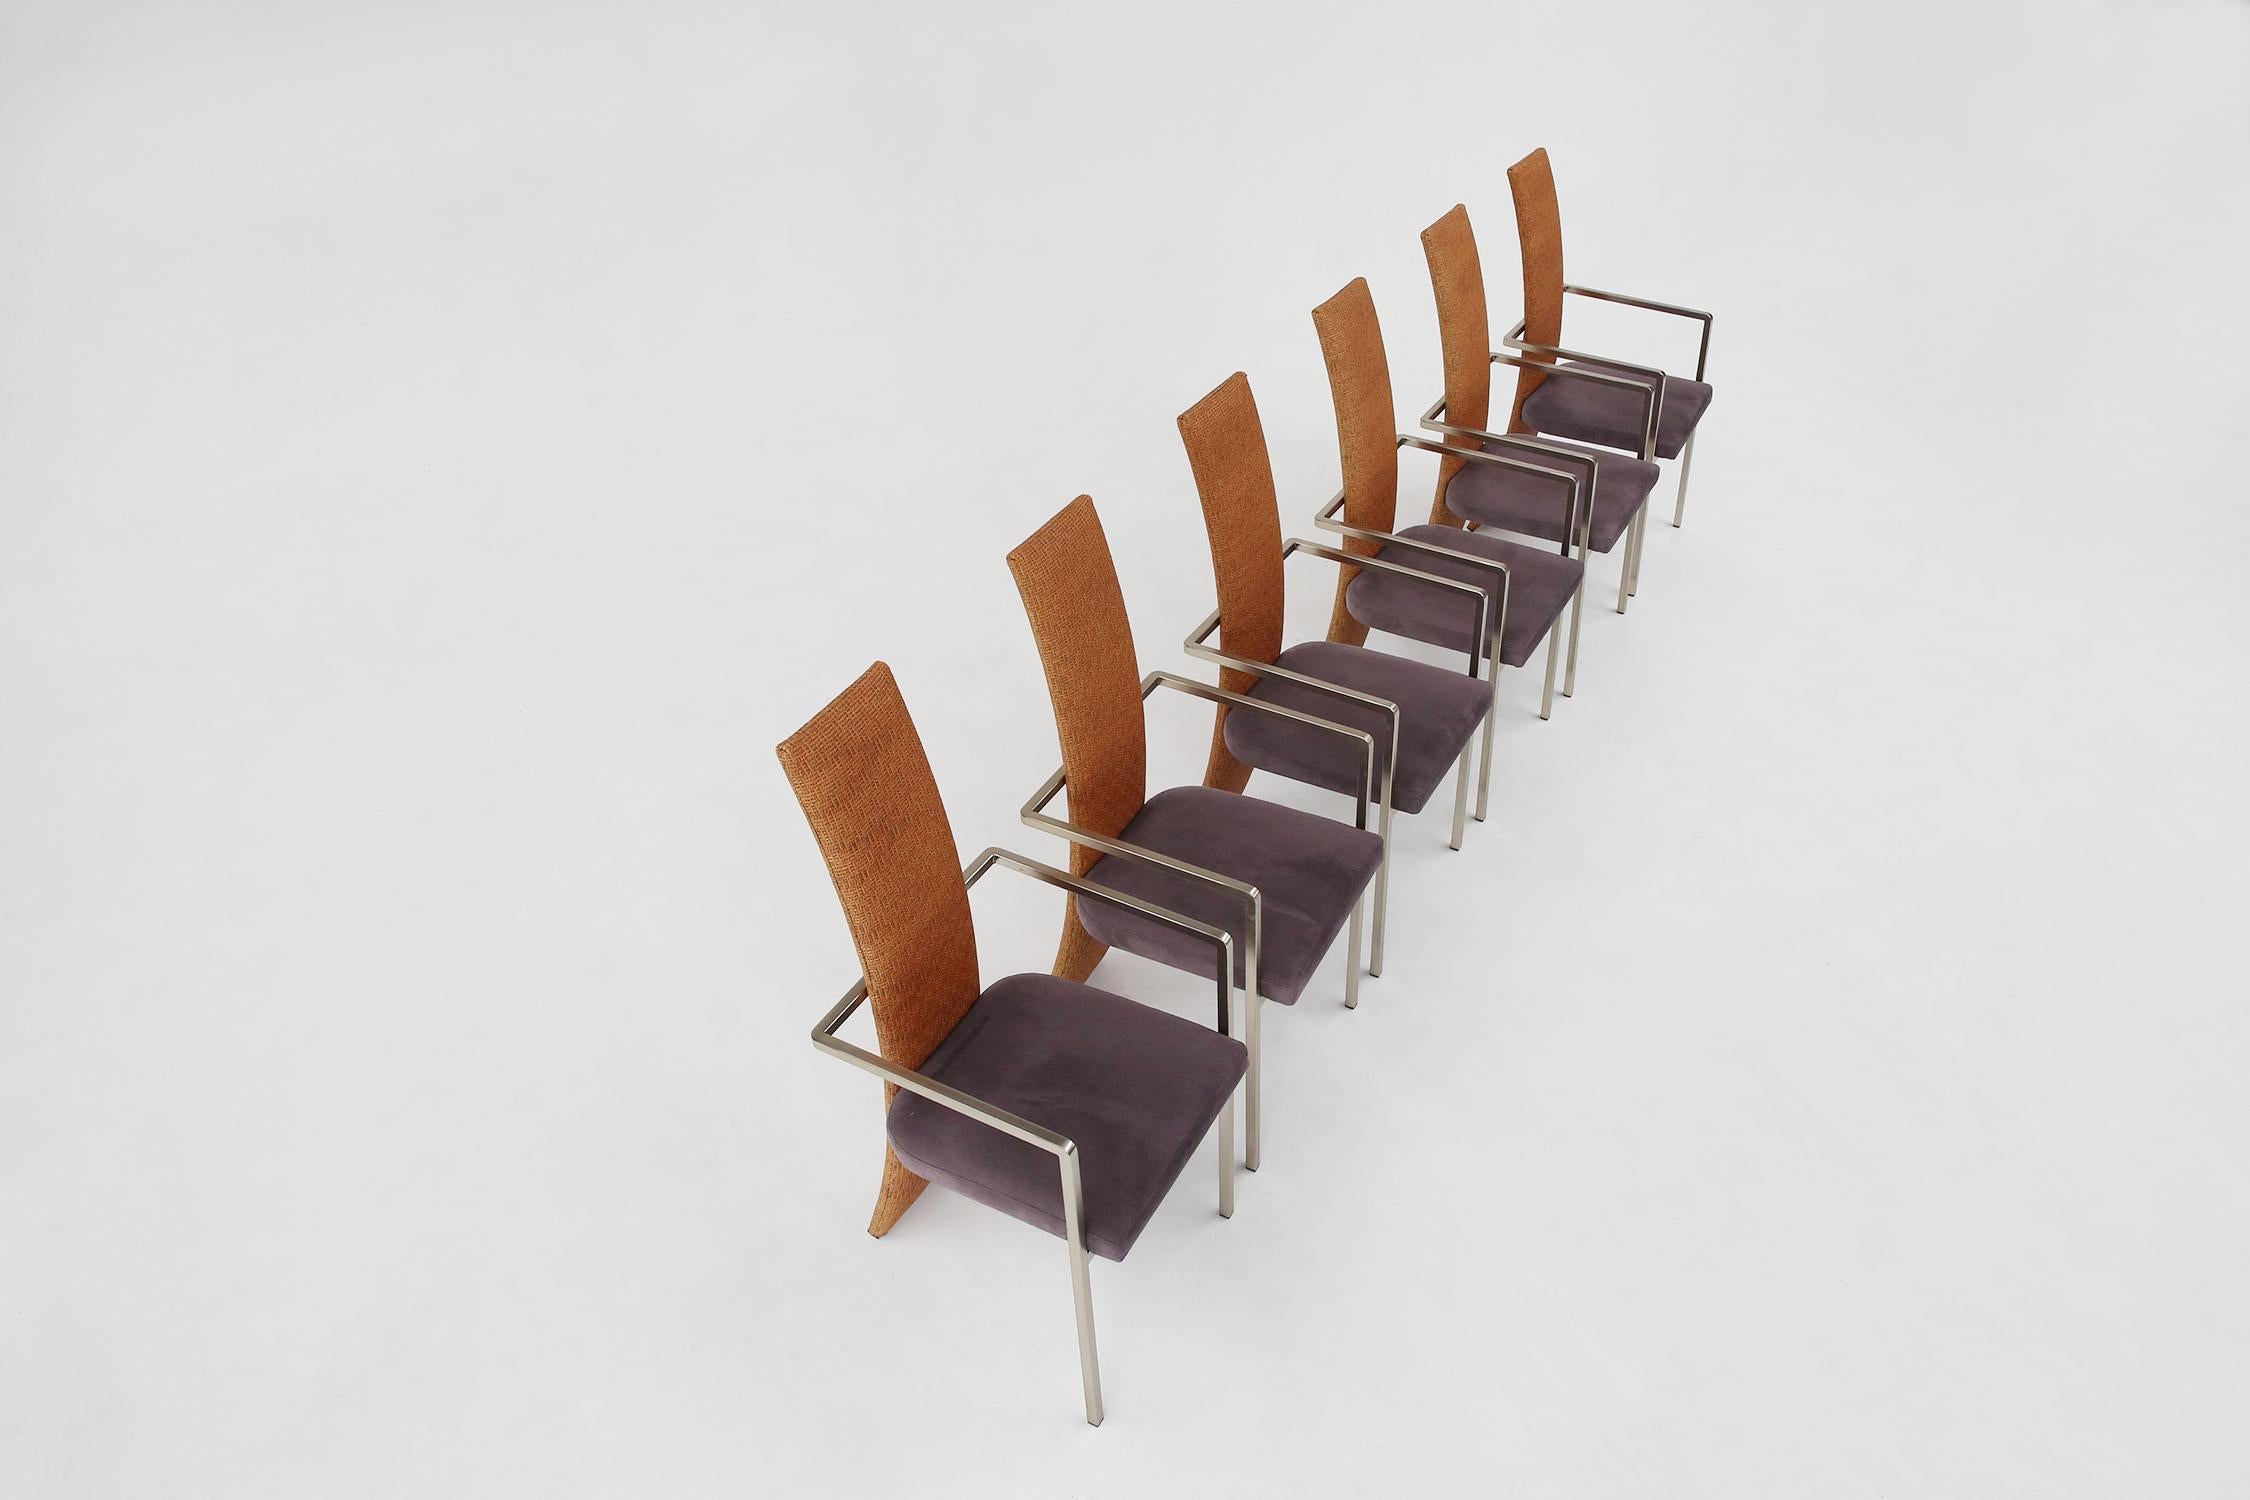 Set of 6 chairs made by Belgian brand Belgo Chrom in 1970s.
Made of stainless steel, purple fabric seat and cane backrest. In the style of Maison Jansen. Matching dining table is also available.